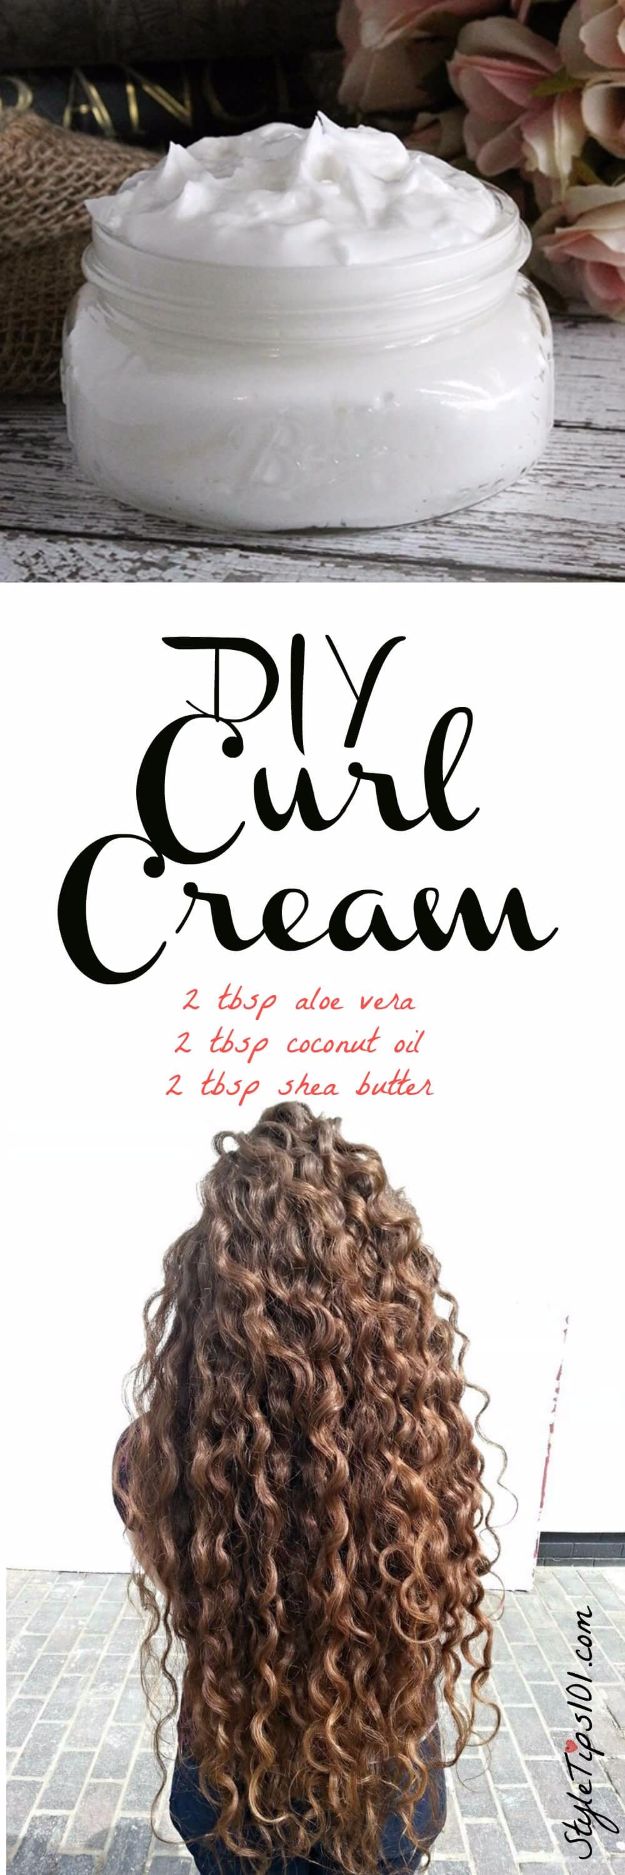 DIY Spa Day Ideas - DIY Curl Cream - Easy Sugar Scrubs, Lotions and Bath Ideas for The Best Pampering You Can Do At Home - Lavender Projects, Relaxing Baths and Bath Bombs, Tub Soaks and Facials - Step by Step Tutorials for Luxury Bath Products 